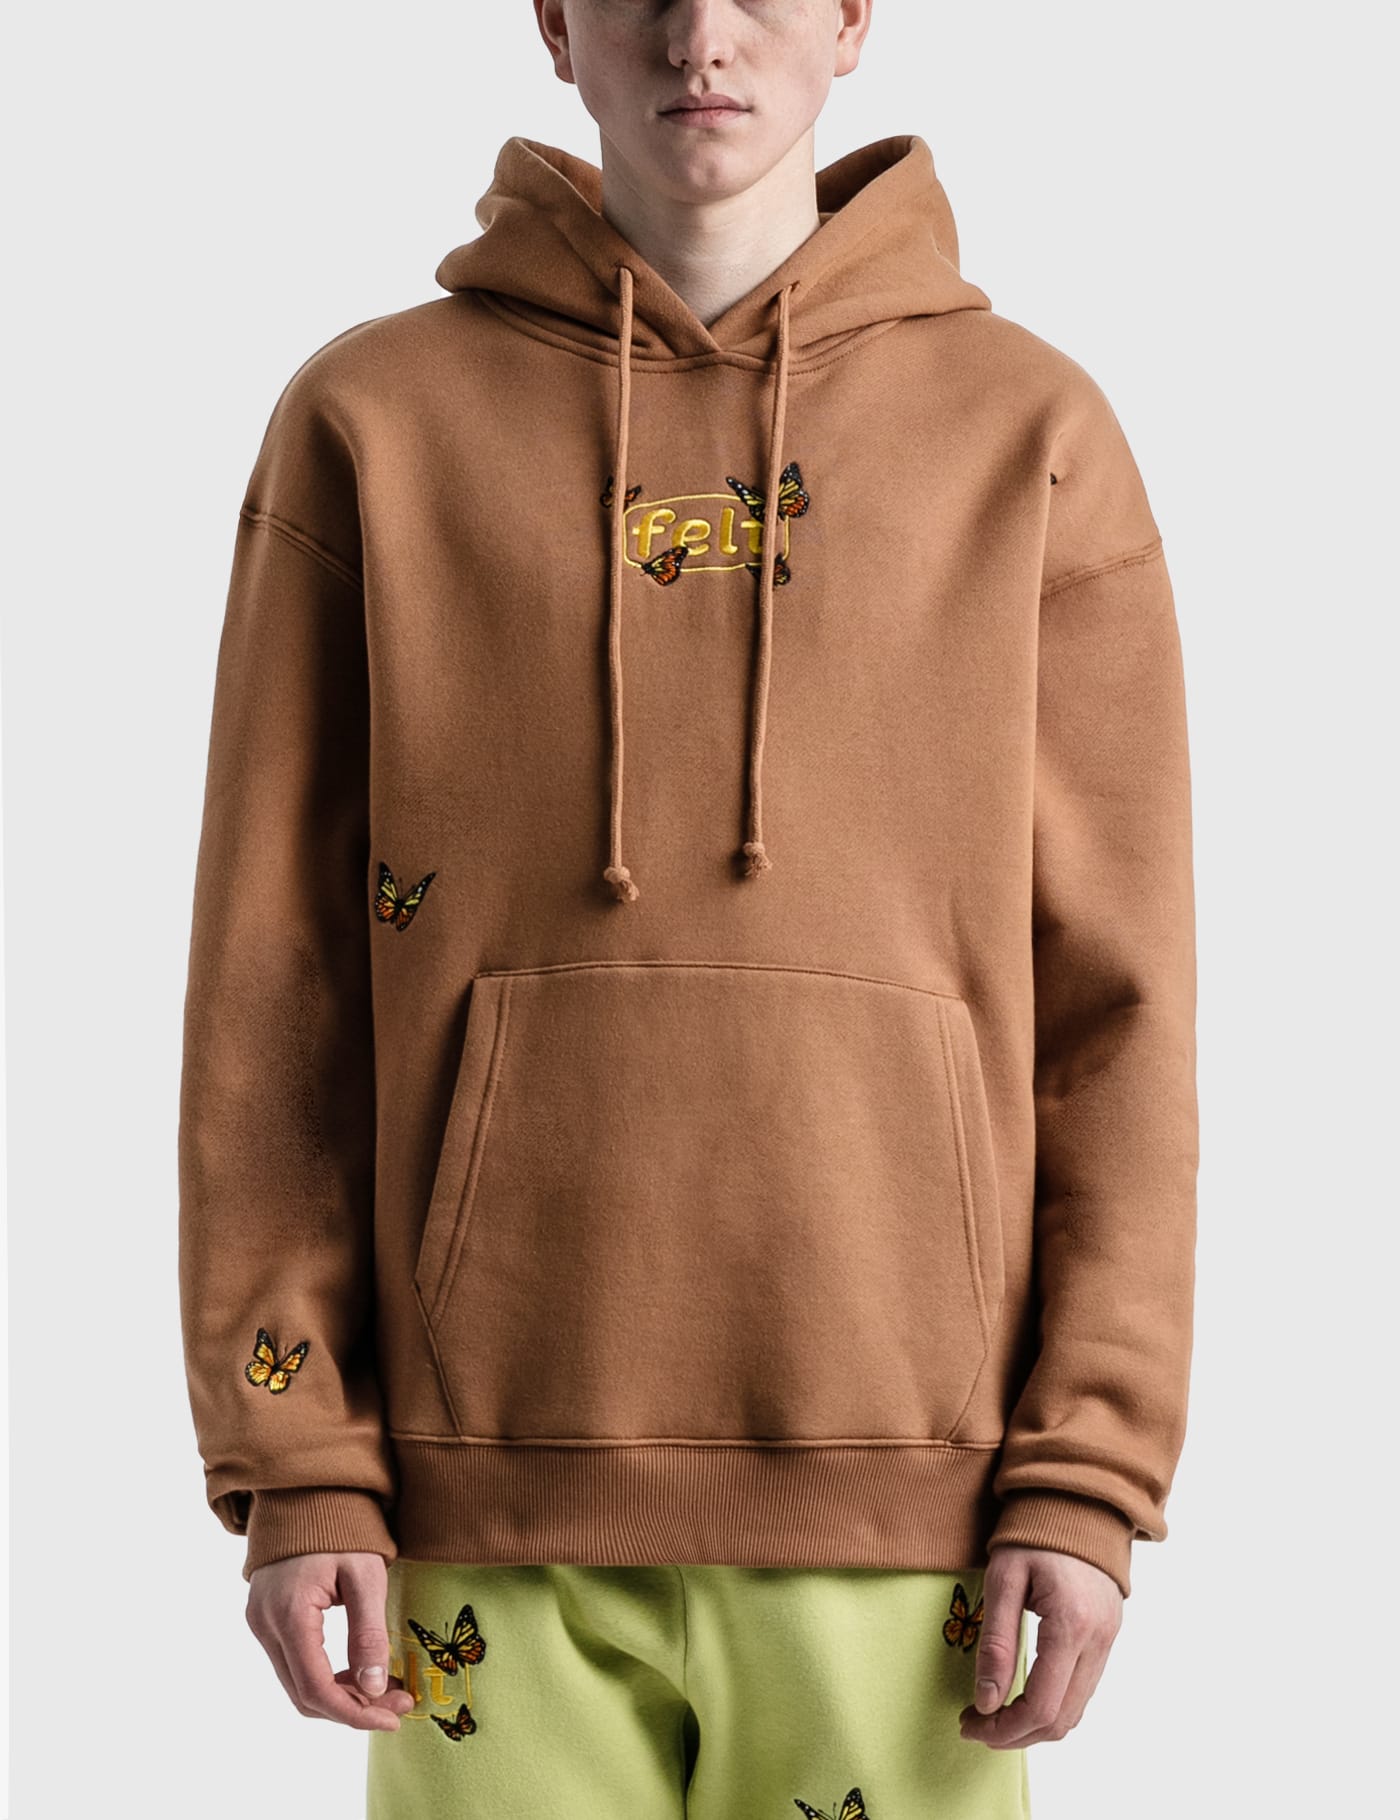 Felt - BUTTERFLY Garden HOODIE | HBX - Globally Curated Fashion 